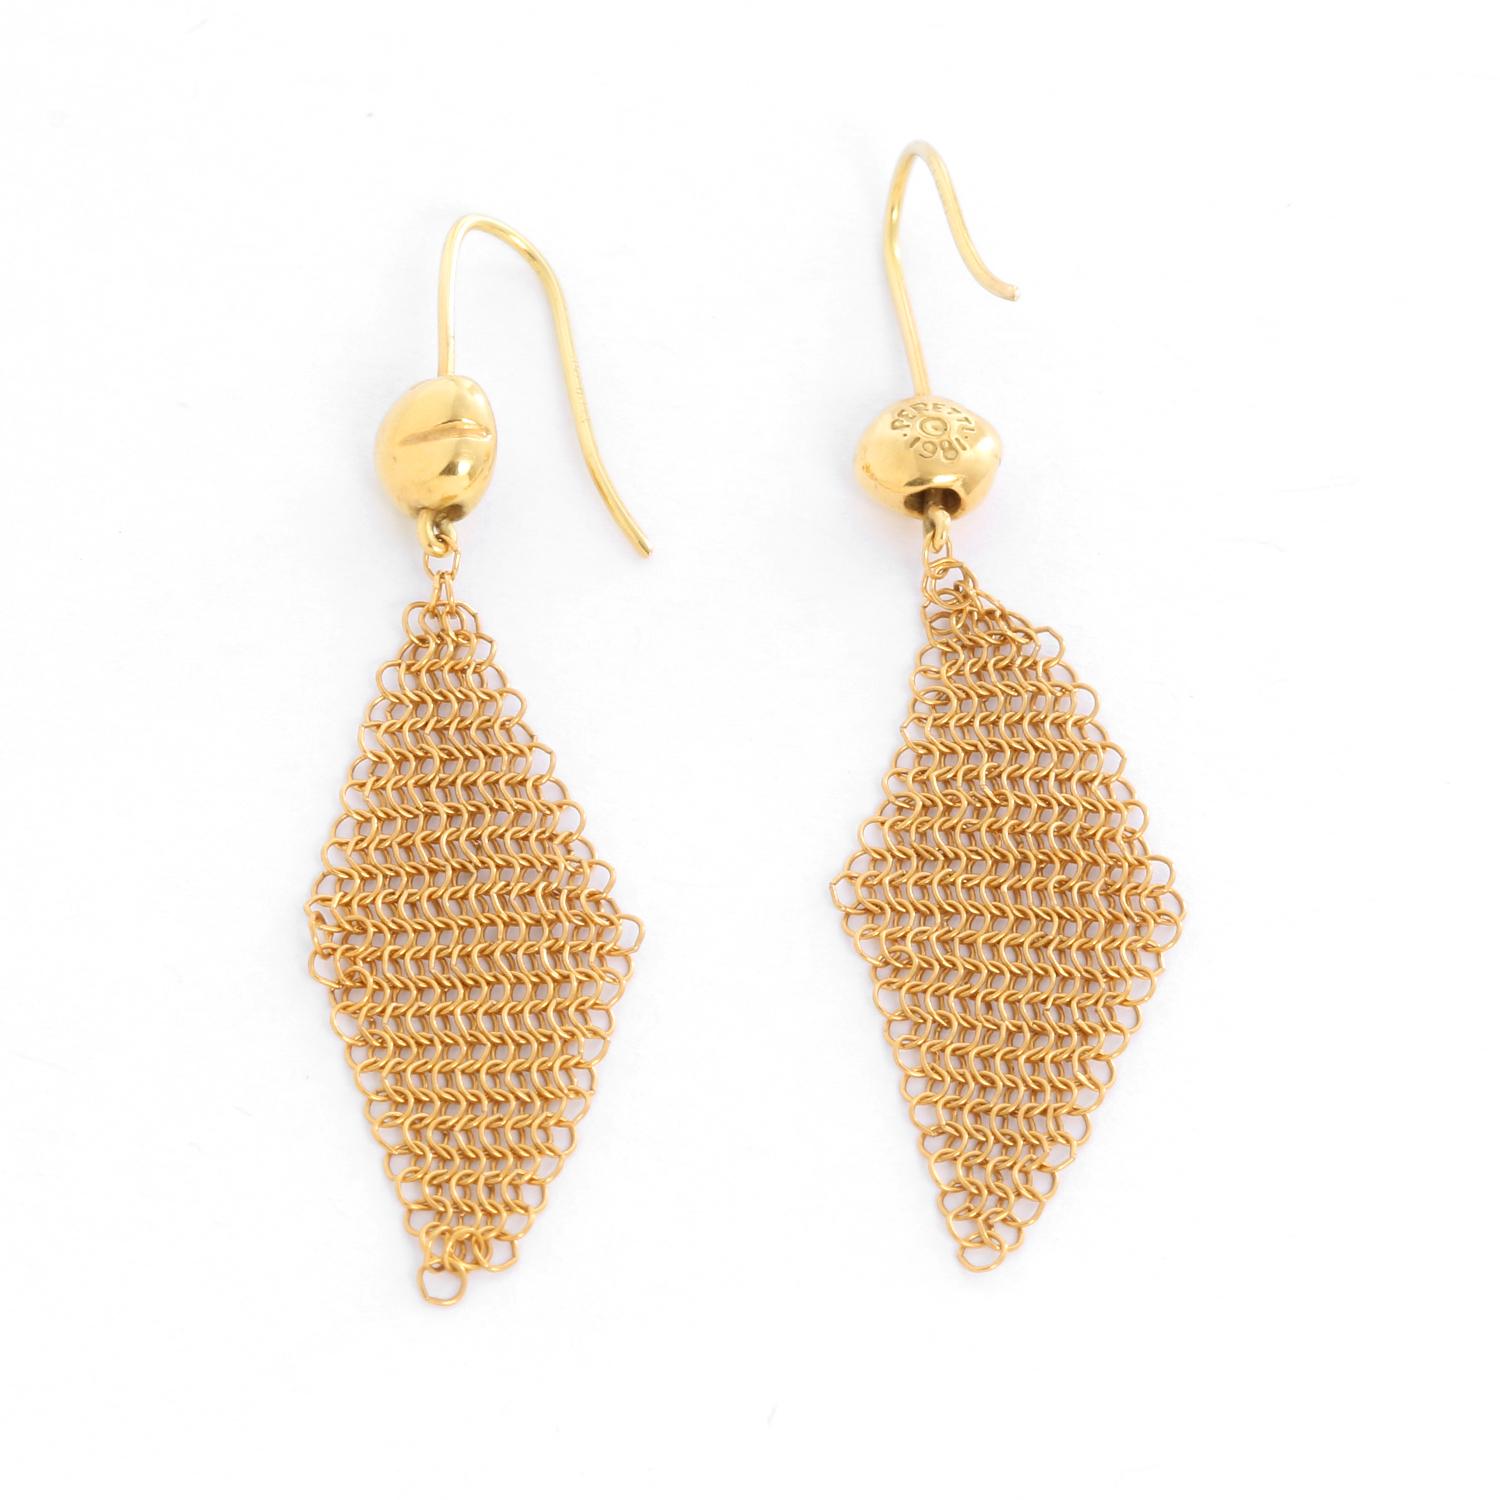 Tiffany & Co. 18K Yellow Gold Elsa Peretti Mesh Drop  Dangle Earrings - Dangle mesh earrings. Measuring at widest point 20 mm. Total length 3 inches. Hallmarks 